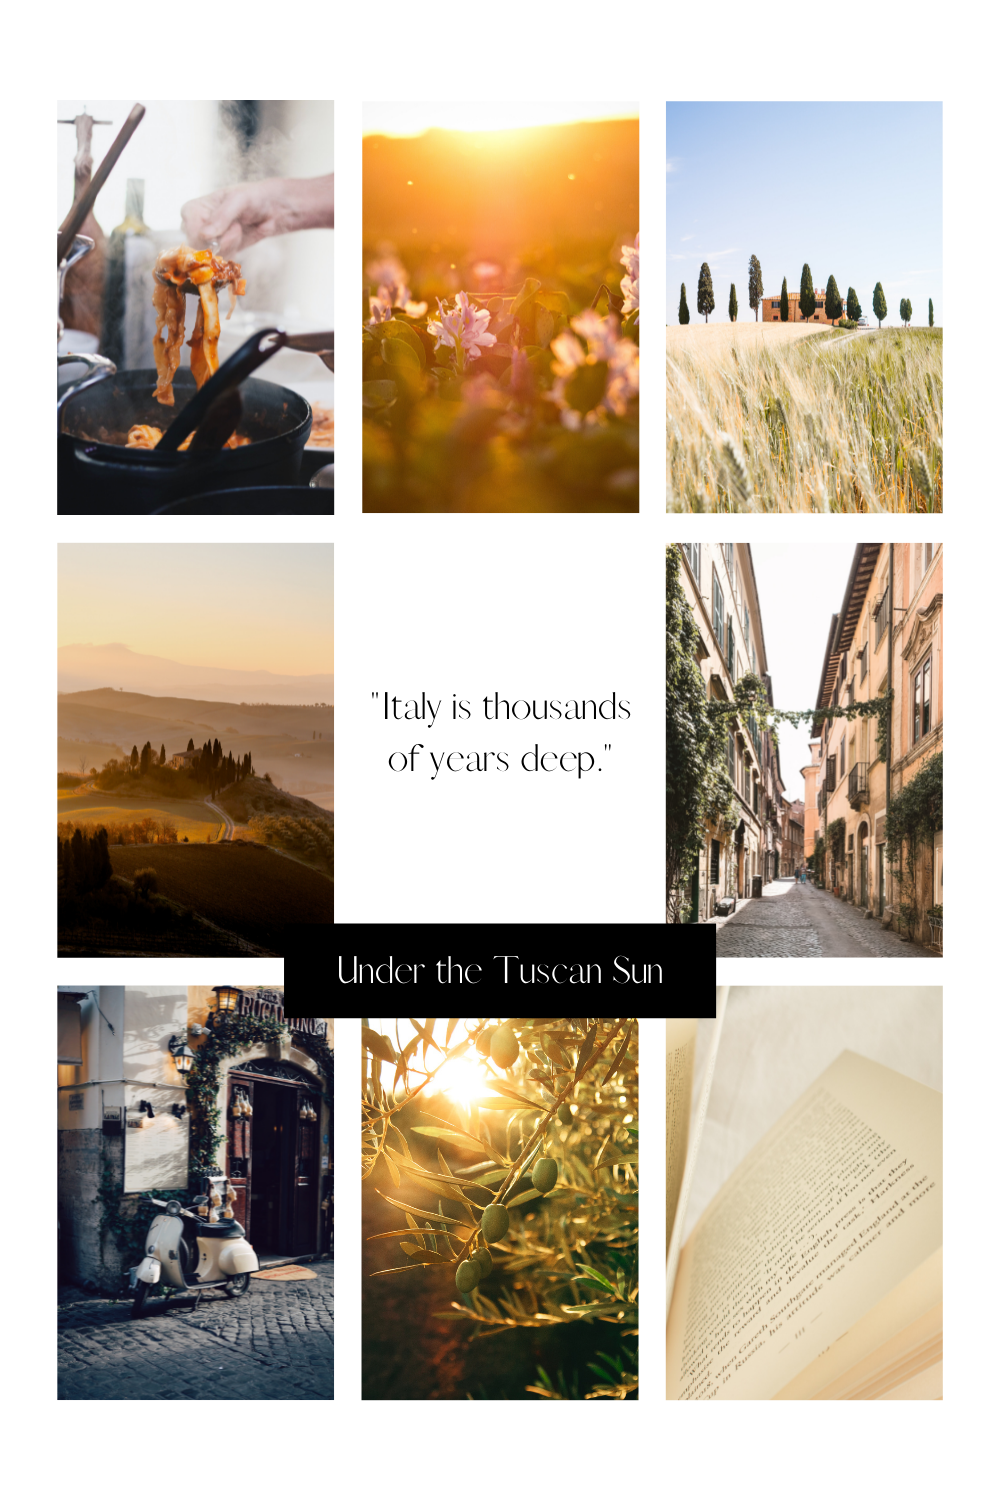 Under the Tuscan Sun collage